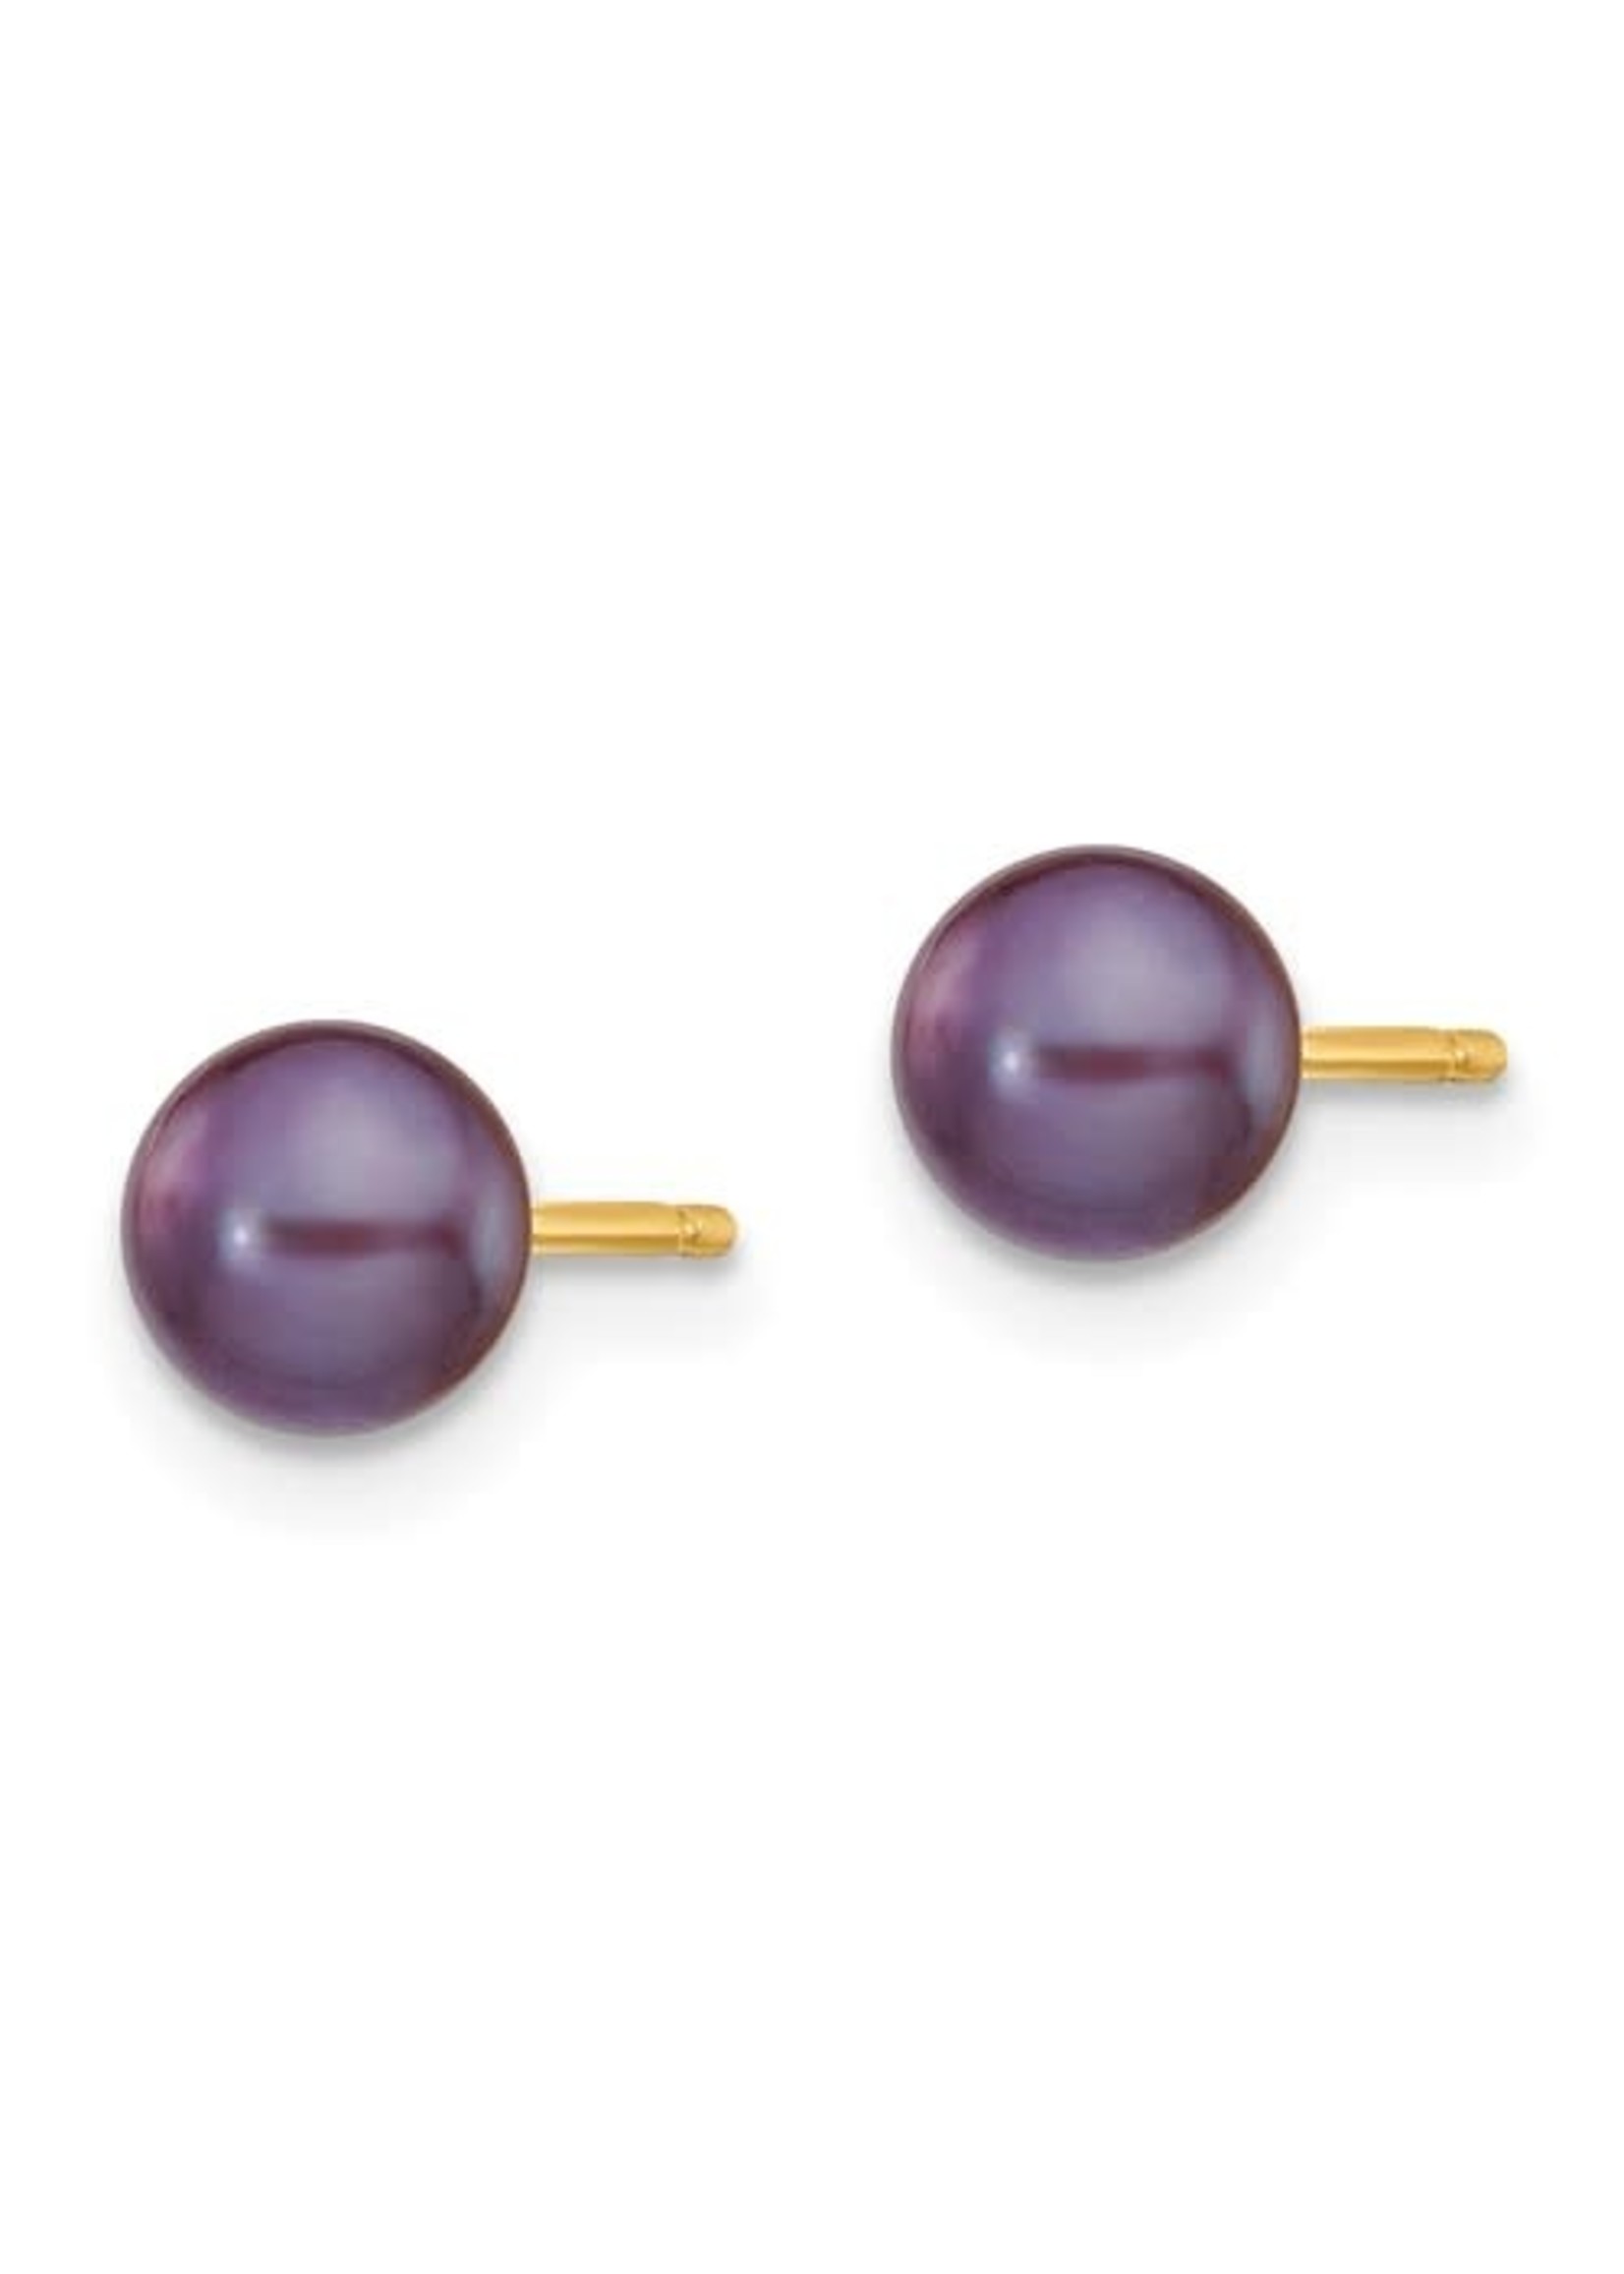 Quality Gold Inc. 14k 5-6mm Black Button Freshwater Cultured Pearl Stud Earrings